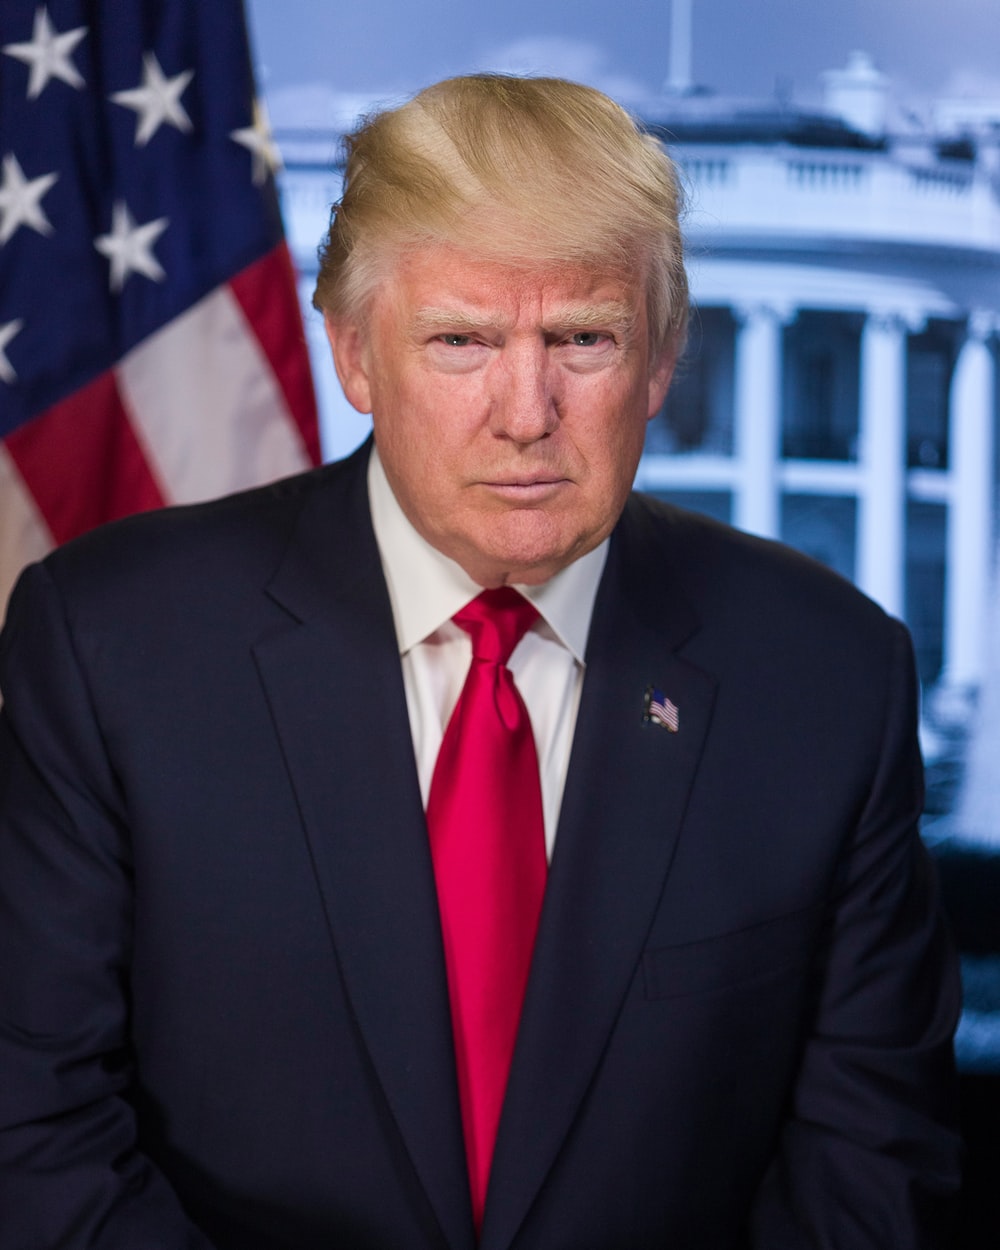 Trump Picture [HQ]. Download Free Image